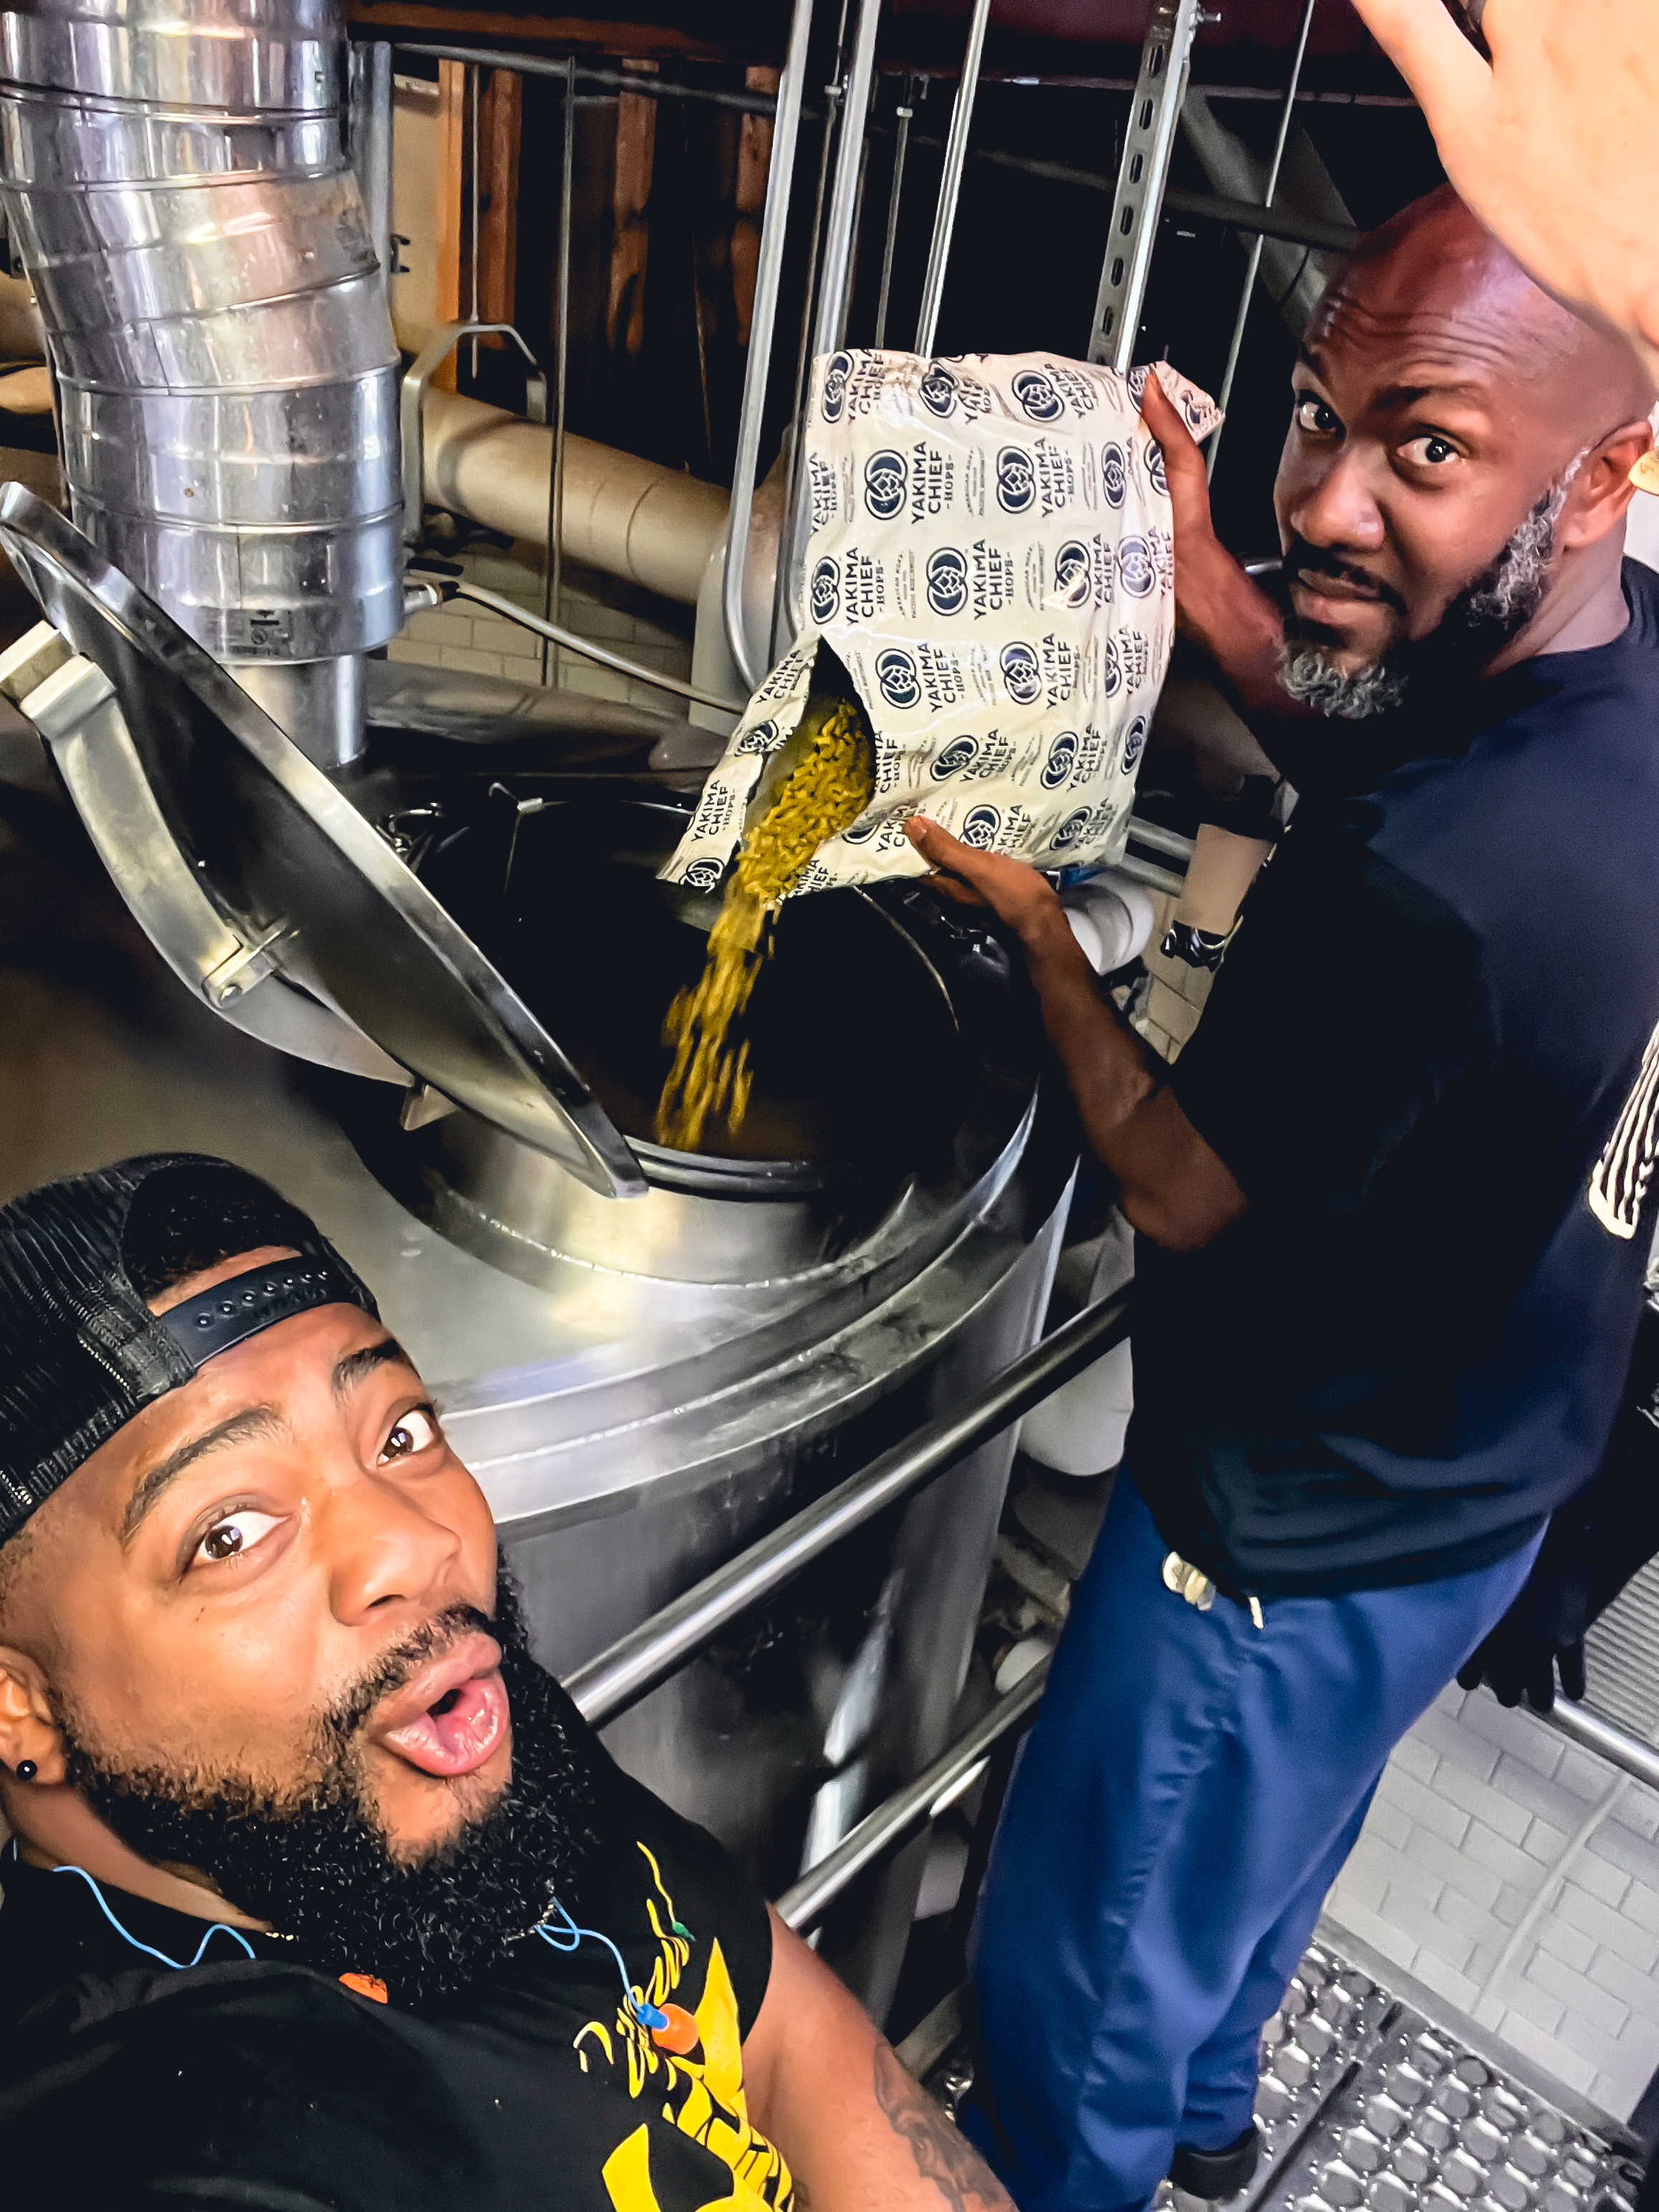 Two Black men add hops to a stainless steel barrel in the beer brewing process